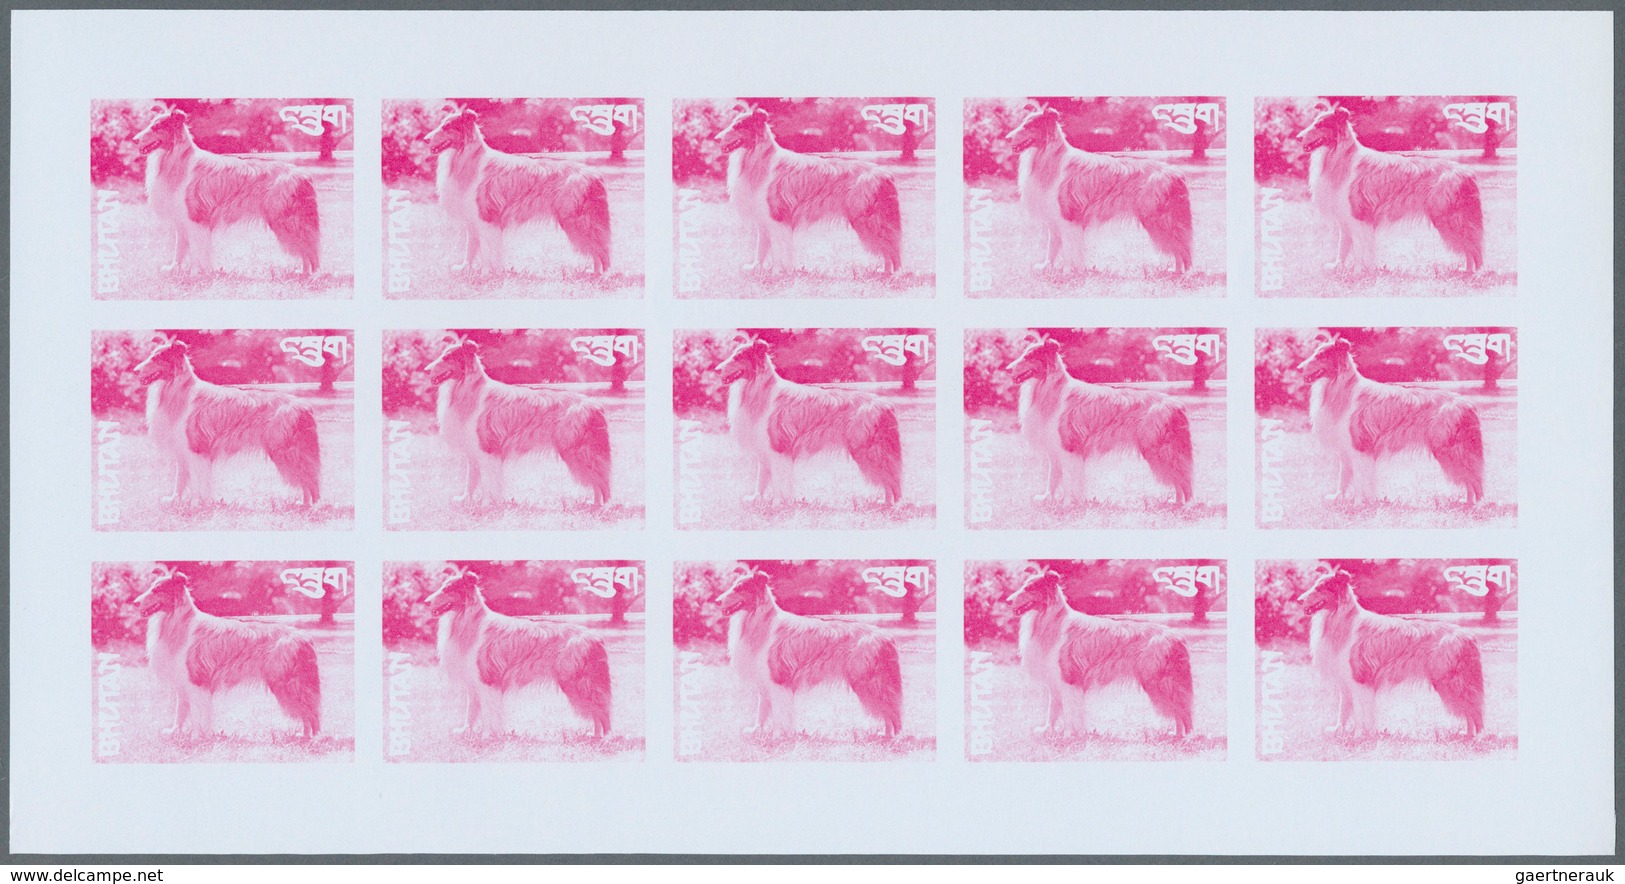 25712 Thematik: Tiere-Hunde / animals-dogs: 1973, Bhutan. Progressive proofs set of sheets for the complet